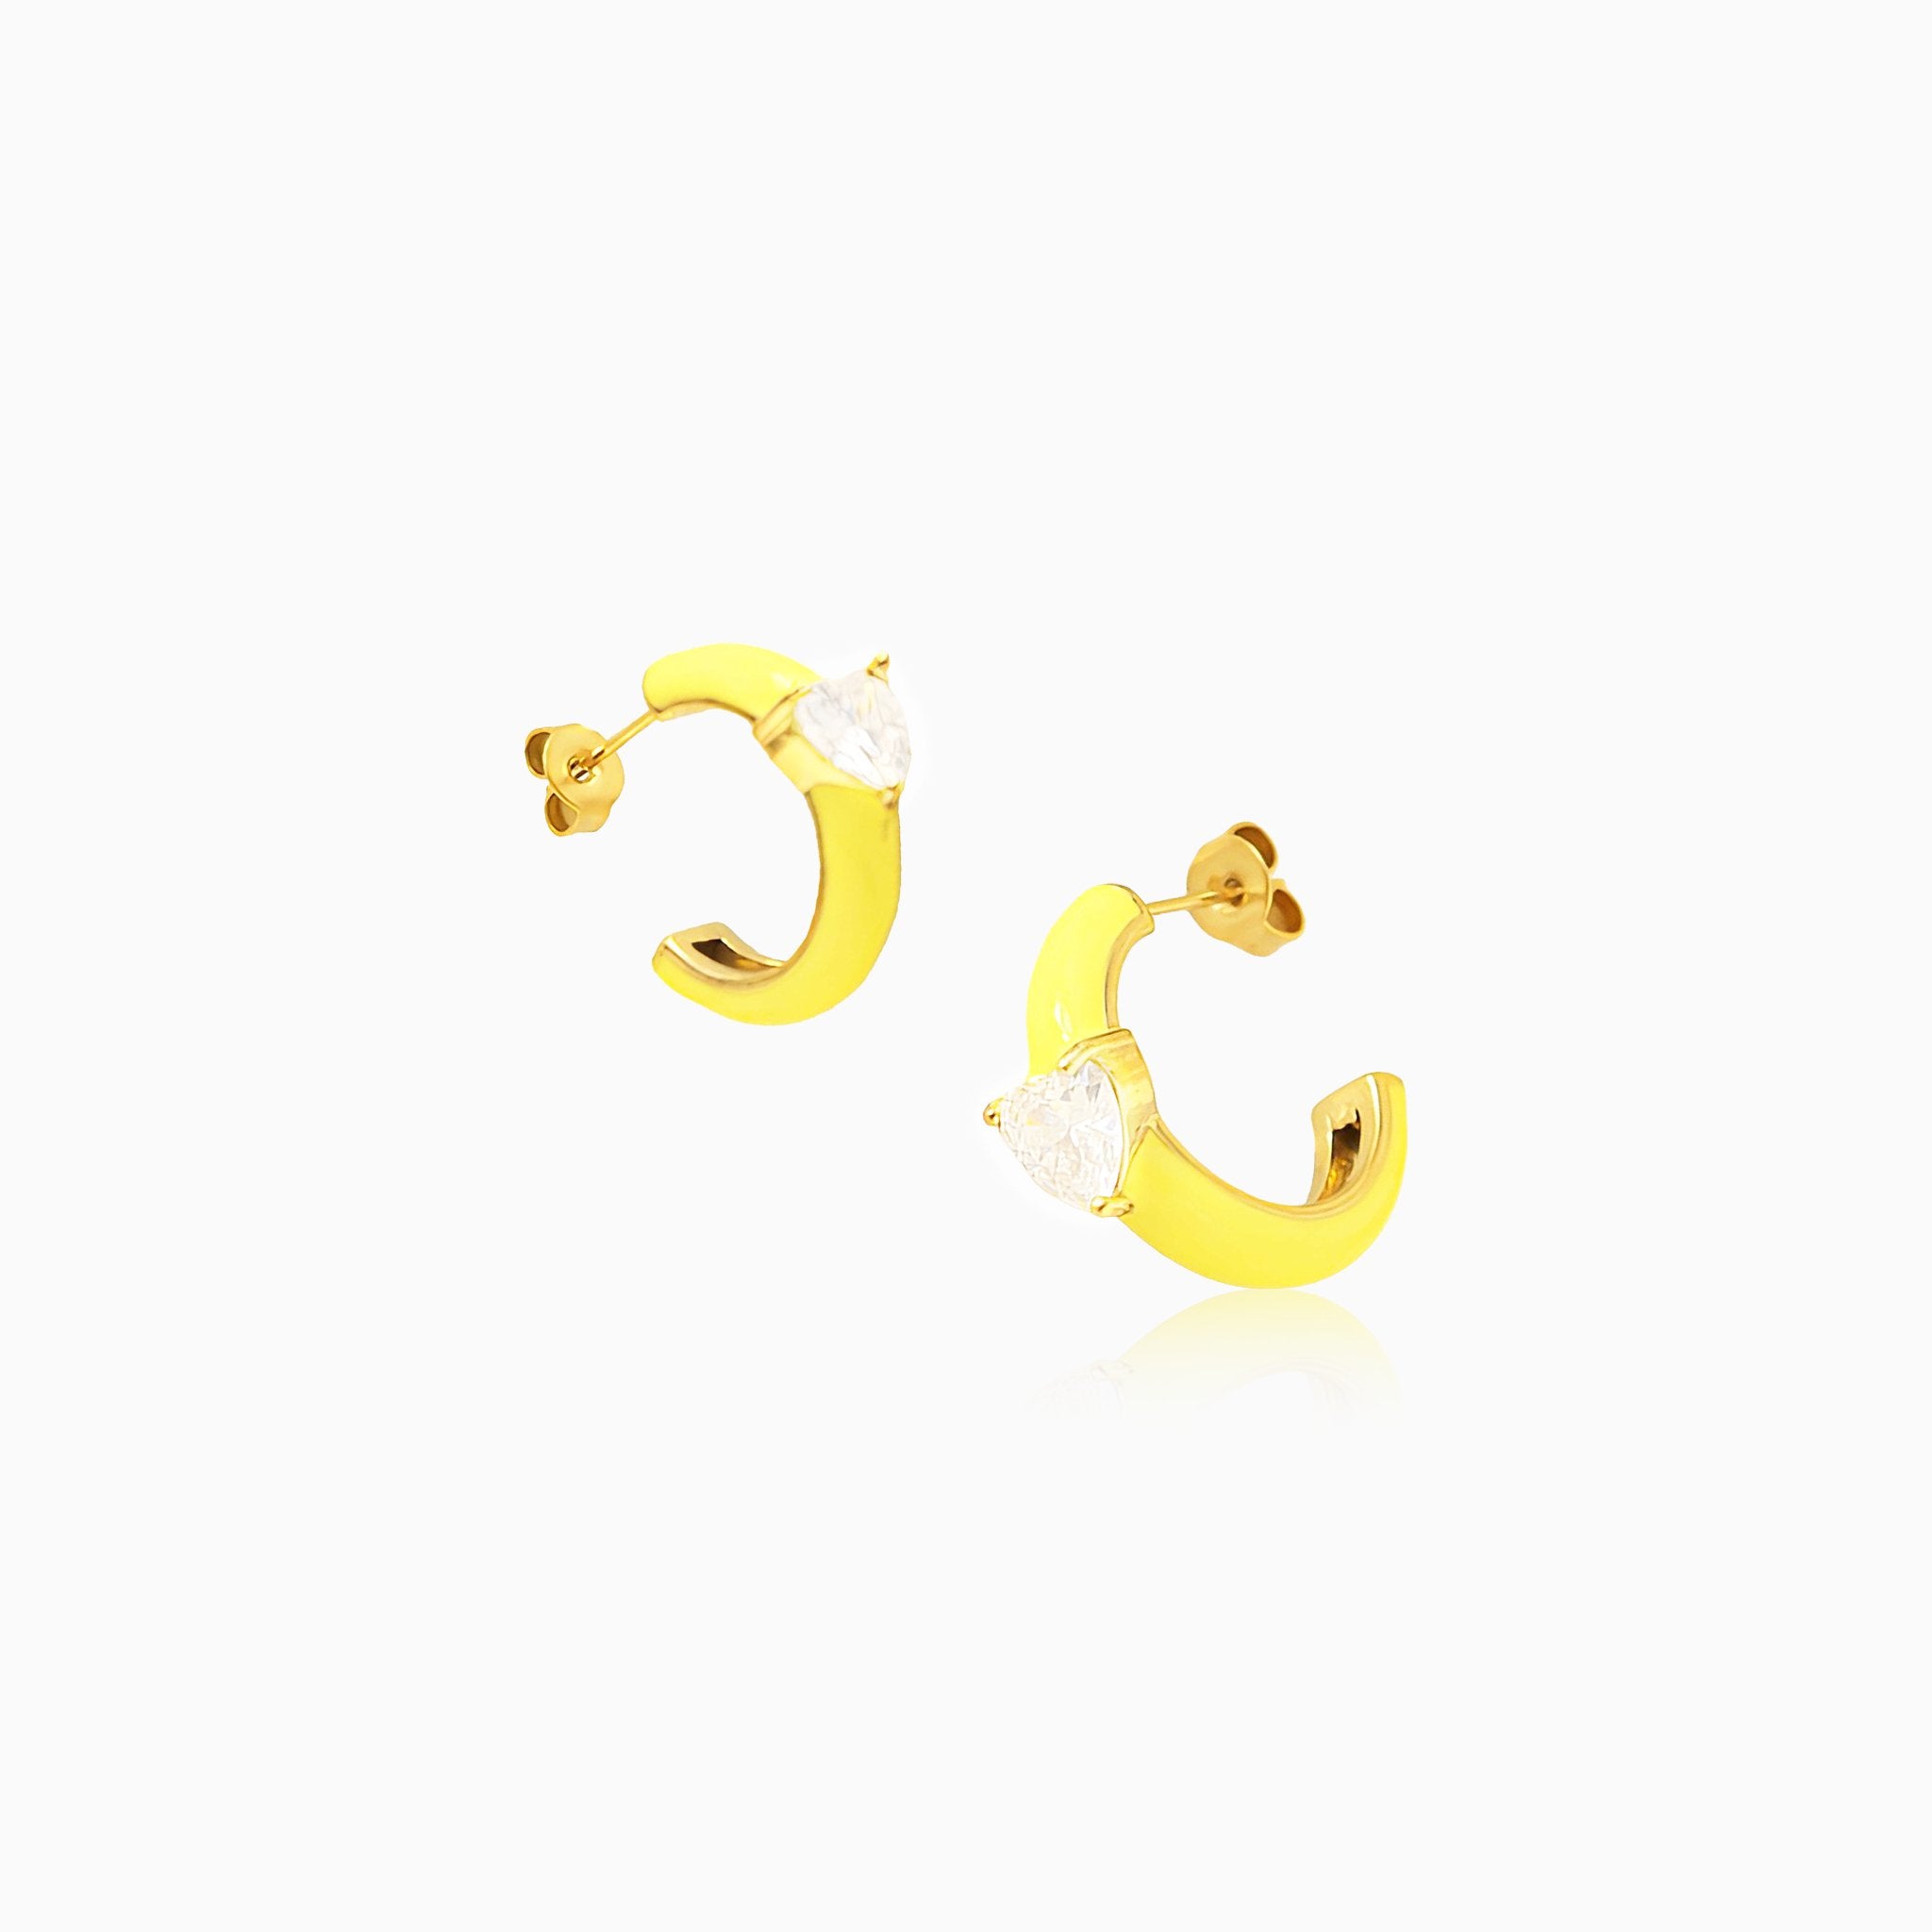 Dazzling C-shaped Earrings - Nobbier - Earring - 18K Gold And Titanium PVD Coated Jewelry